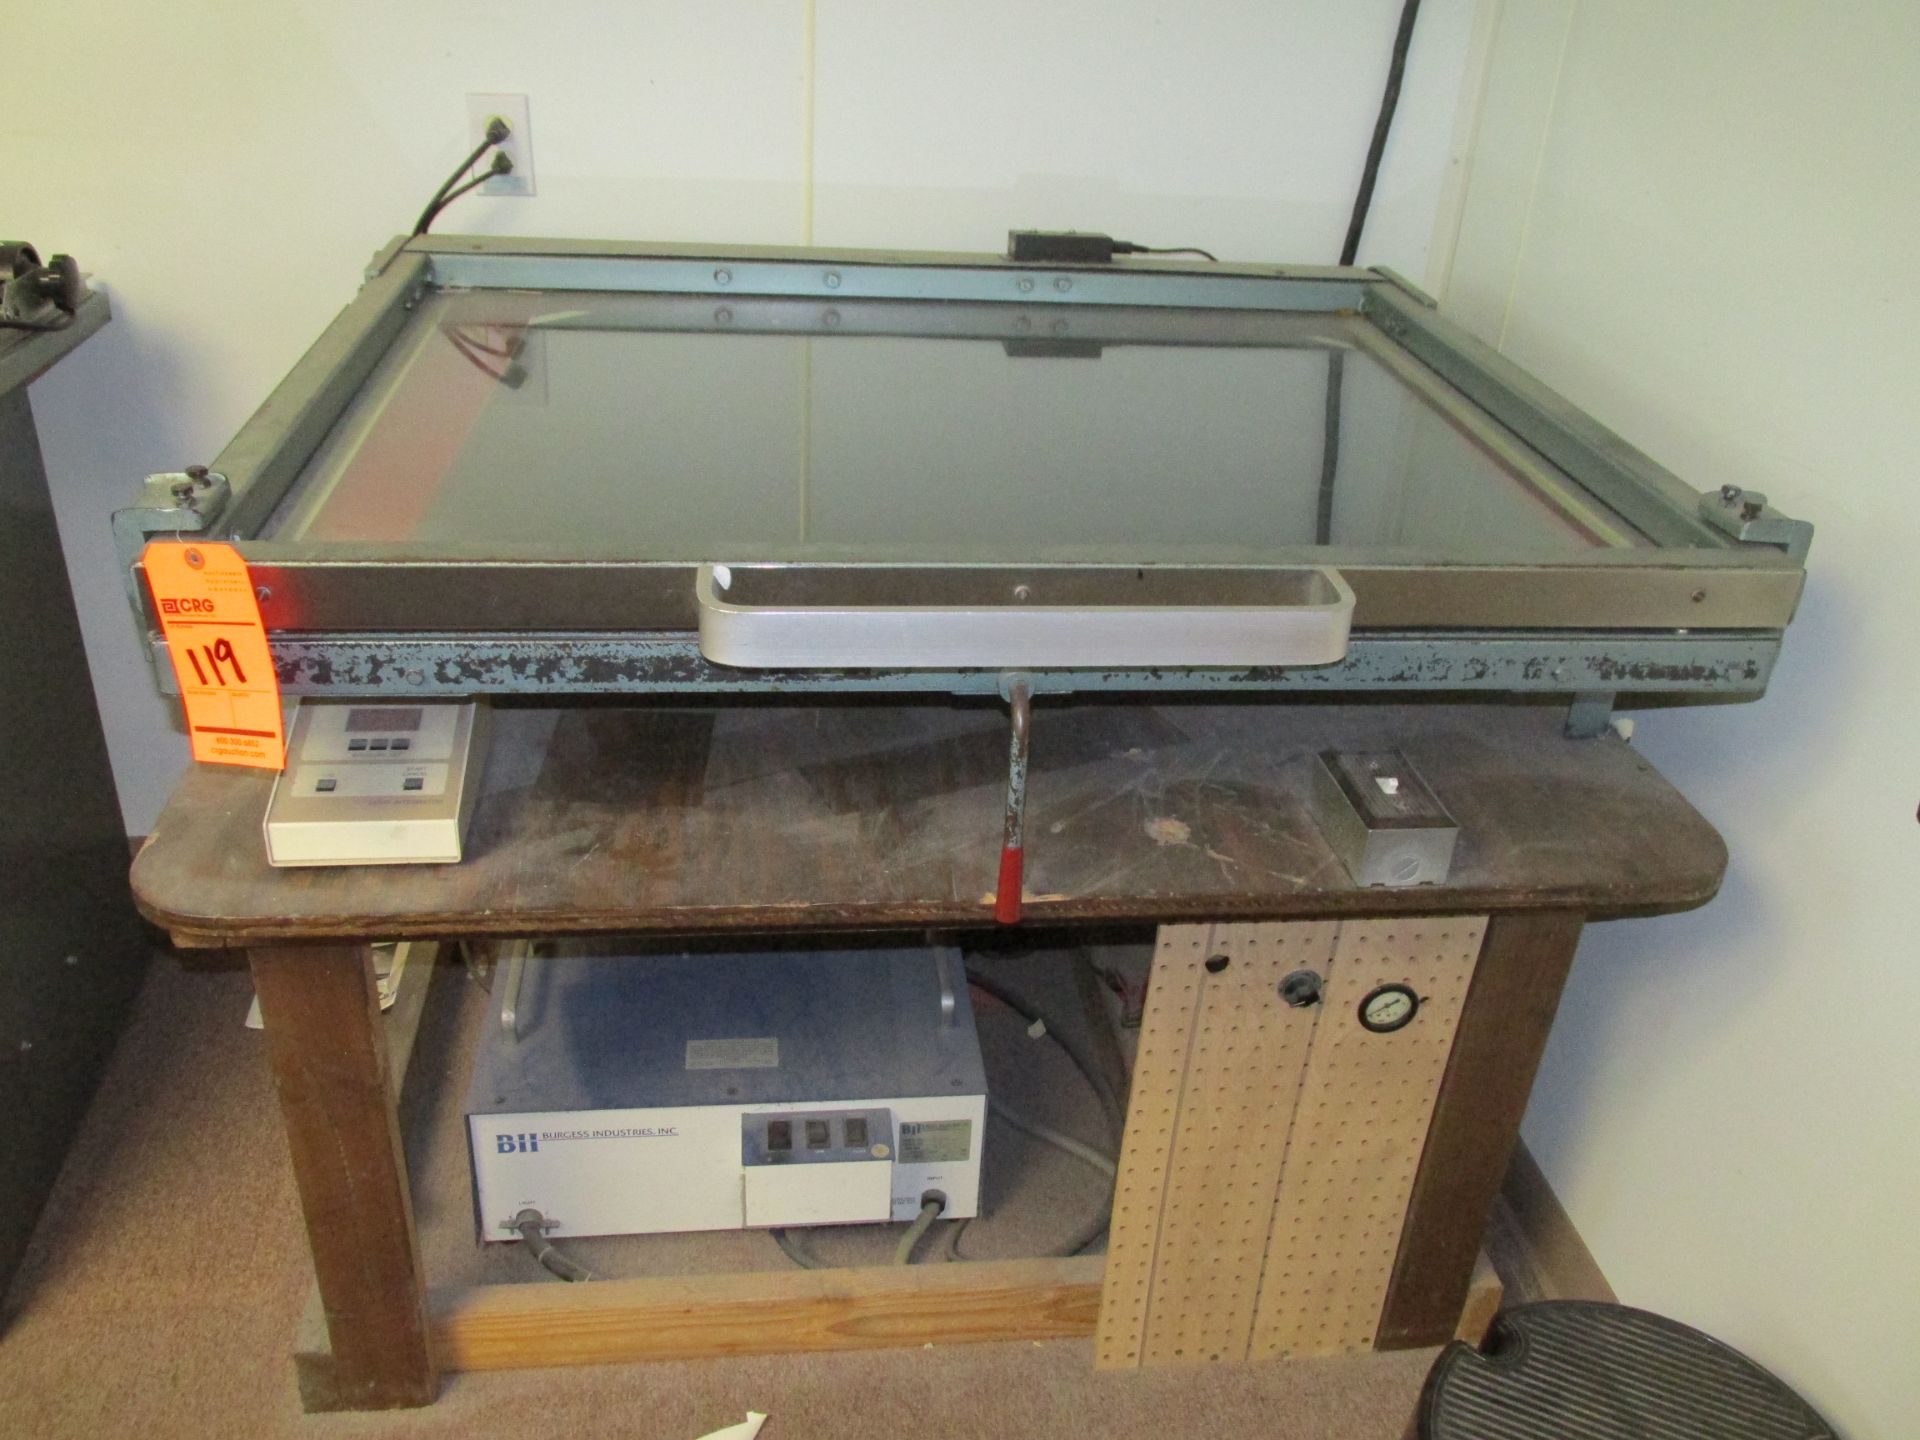 Brown 30" x 40" plate maker with Burgess 5 kw light source